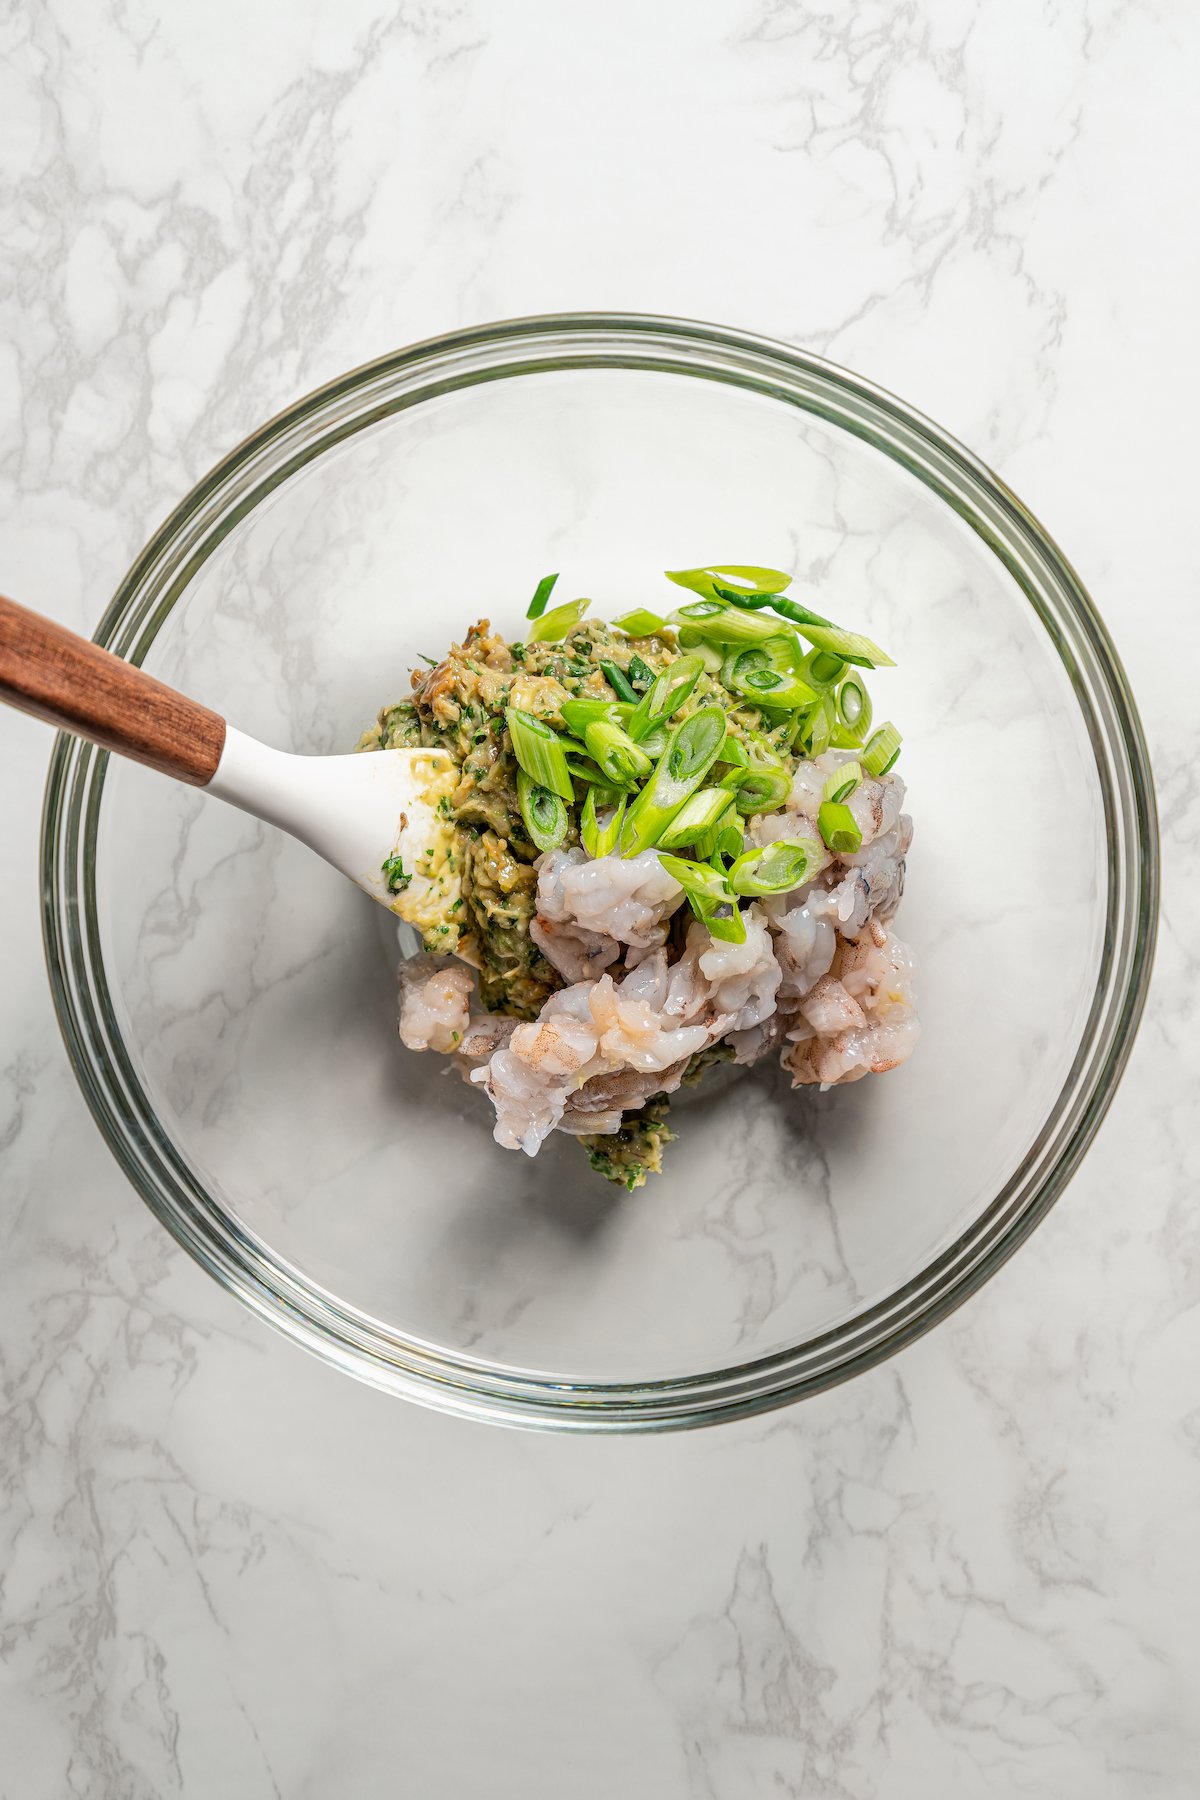 Shrimp shumai filling ingredients combined in a glass bowl with spatula.